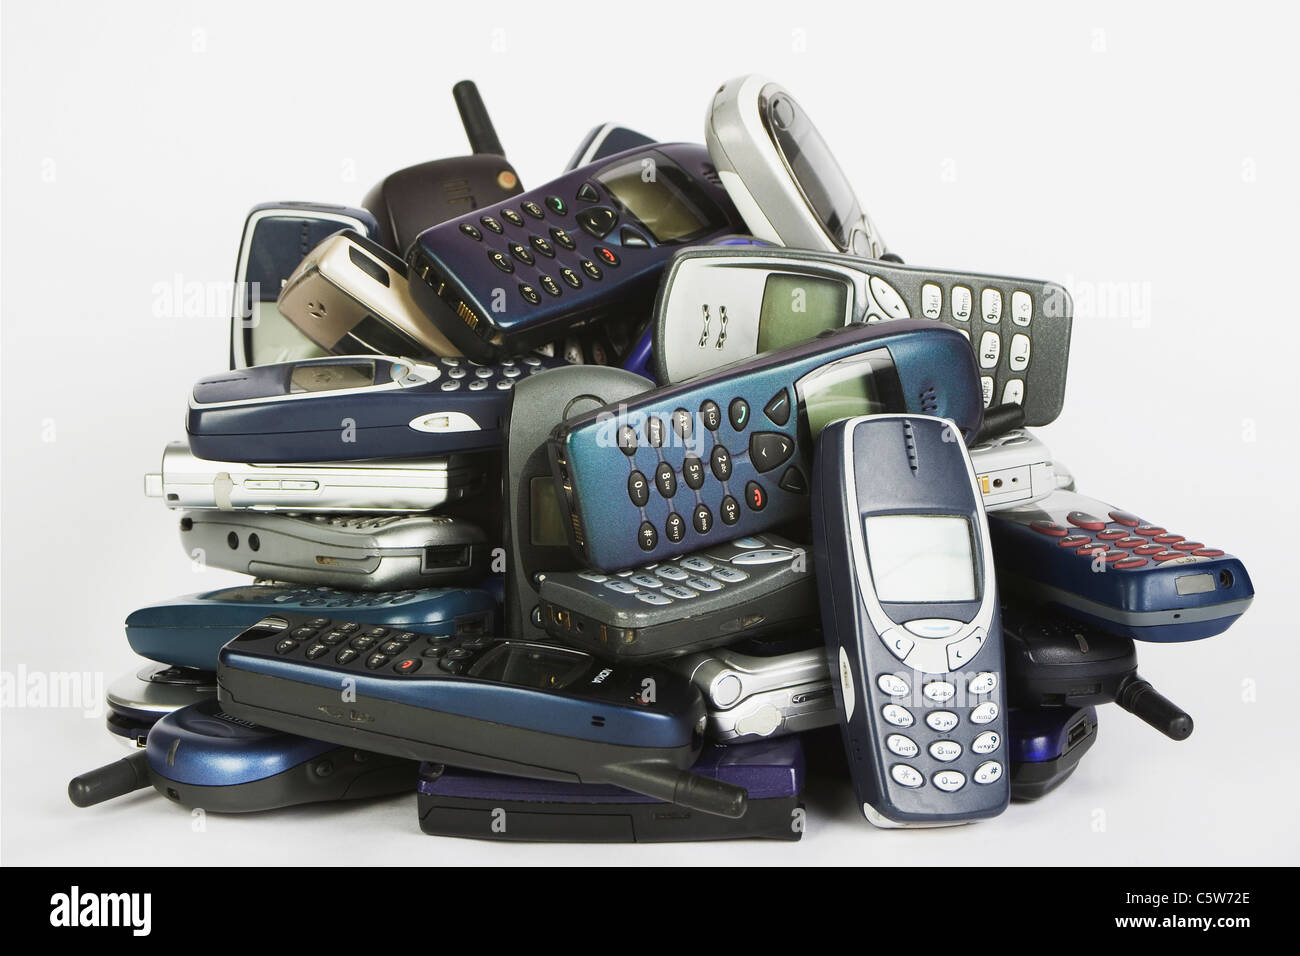 Old mobile phones, close-up Stock Photo